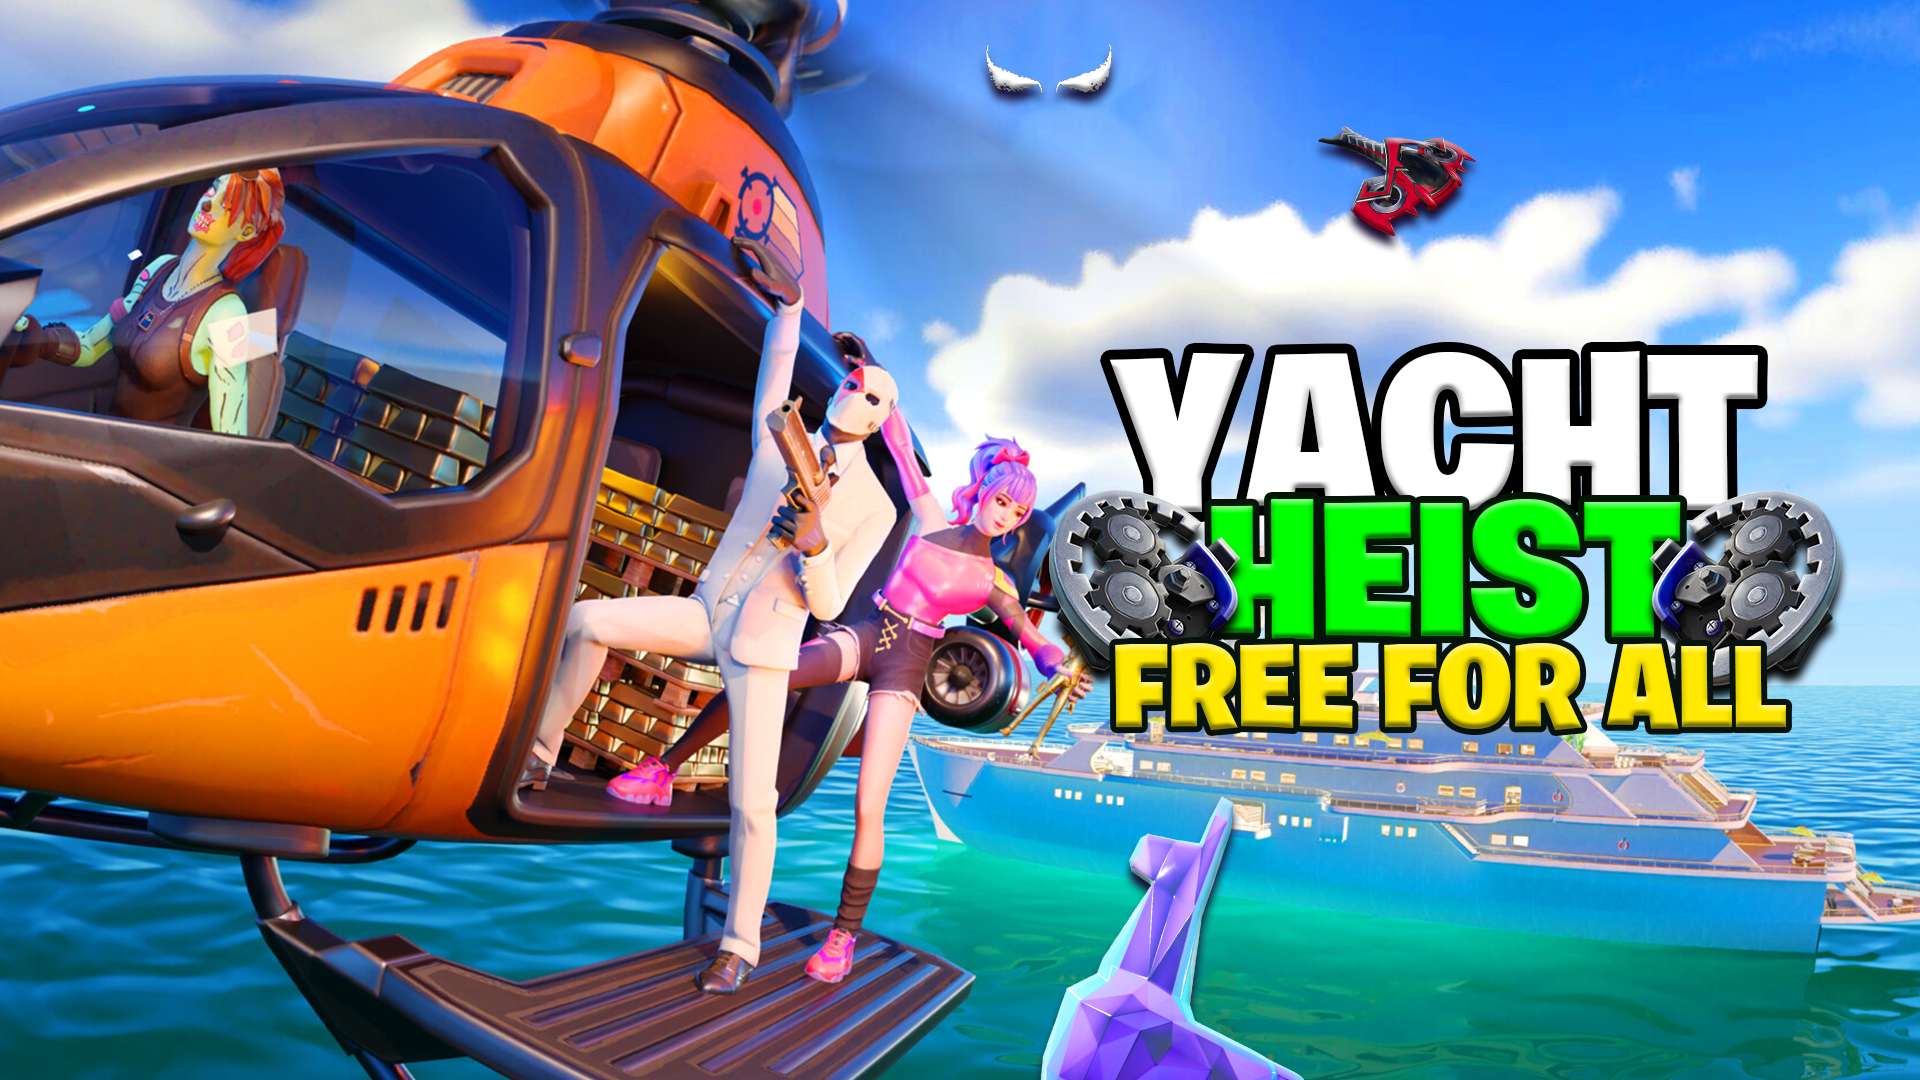 YACHT HEIST - FREE FOR ALL image 2